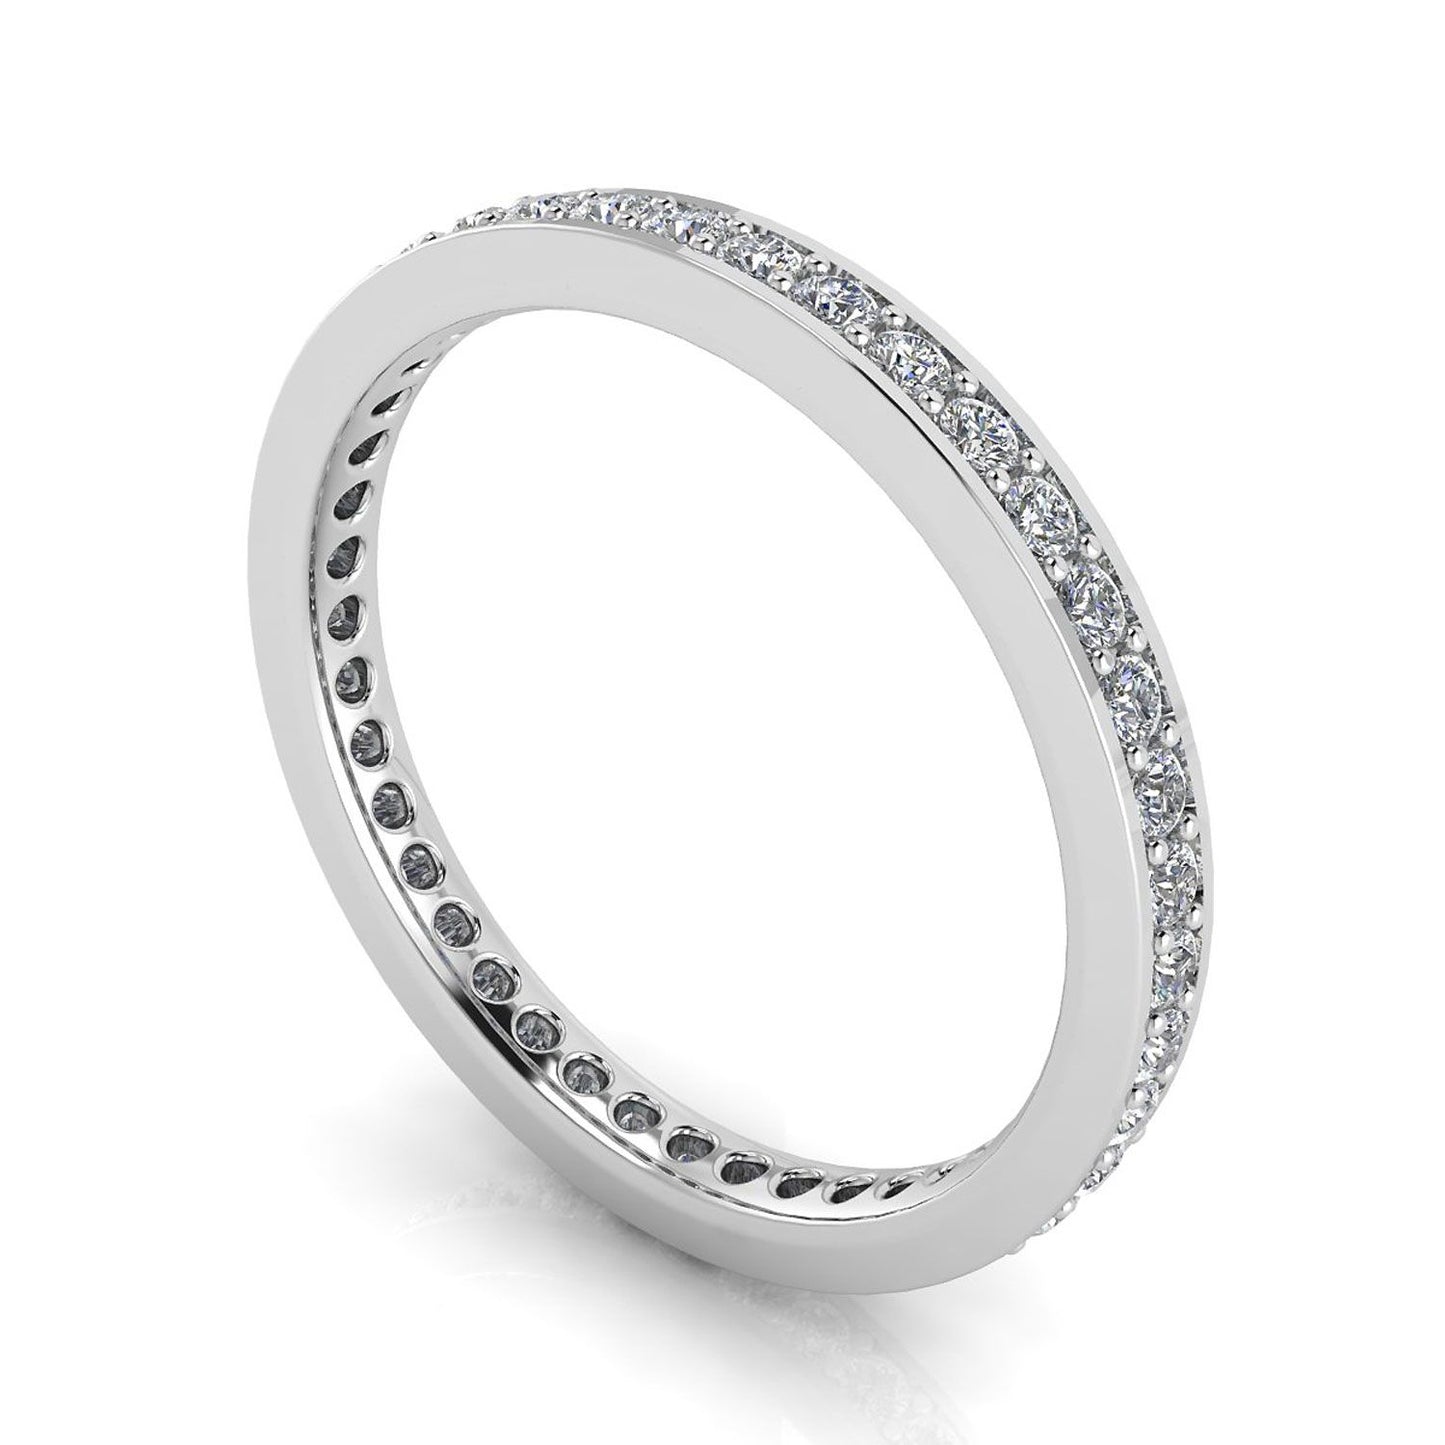 Round Brilliant Cut Diamond Channel Pave Set Eternity Ring In Platinum  (0.3ct. Tw.) Ring Size 5